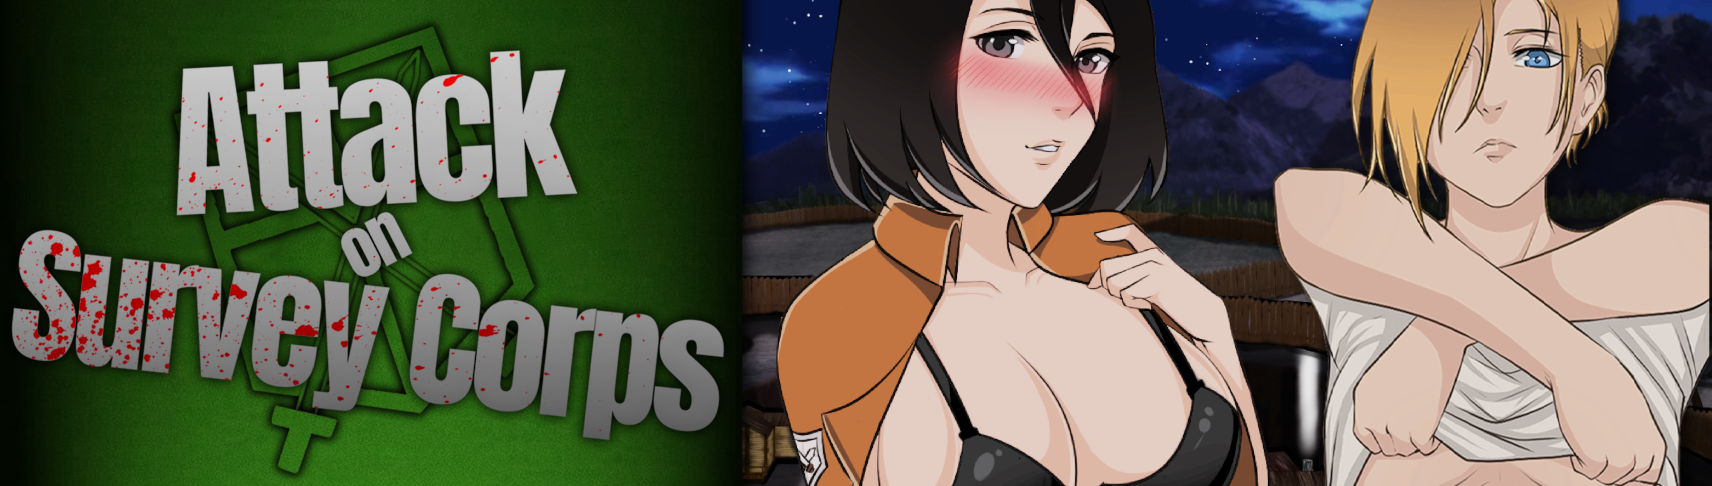 Attack on Survey Corps [v 0.13.4] - Free Sex Games